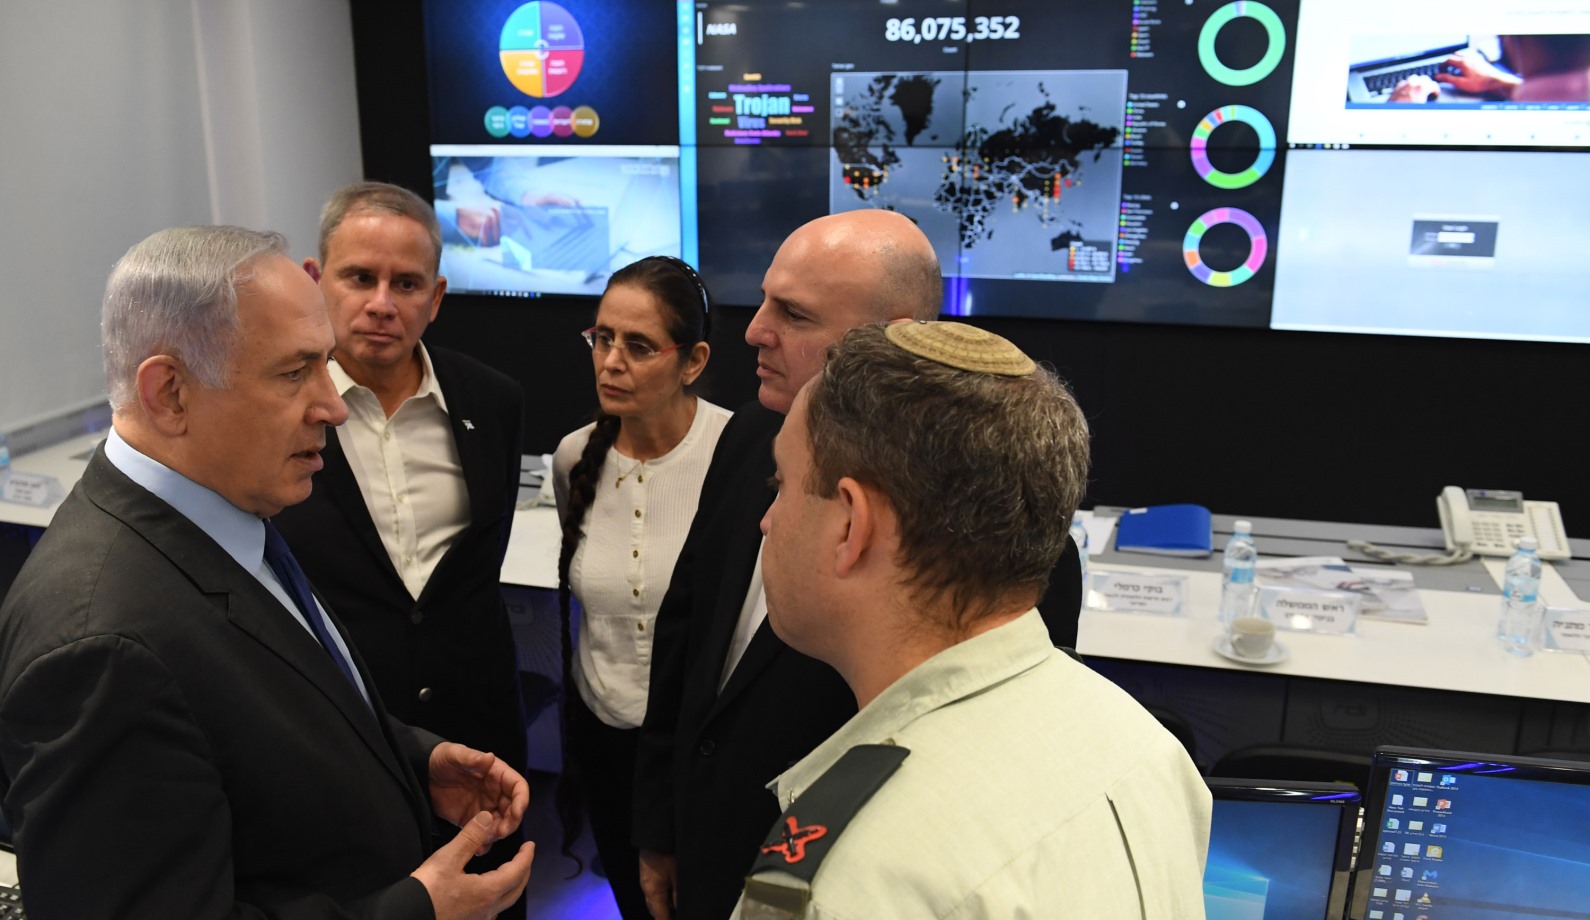 Israeli prime Minister Benjamin Netanyahu visits CyberSpark in Beersheva with Buki Carmeli, head of the National Cyber Defense Authority, and Eviatar Matania, head of the National Cyber Bureau in the Prime Minister's office. Photo by Kobi Gideon/GPO